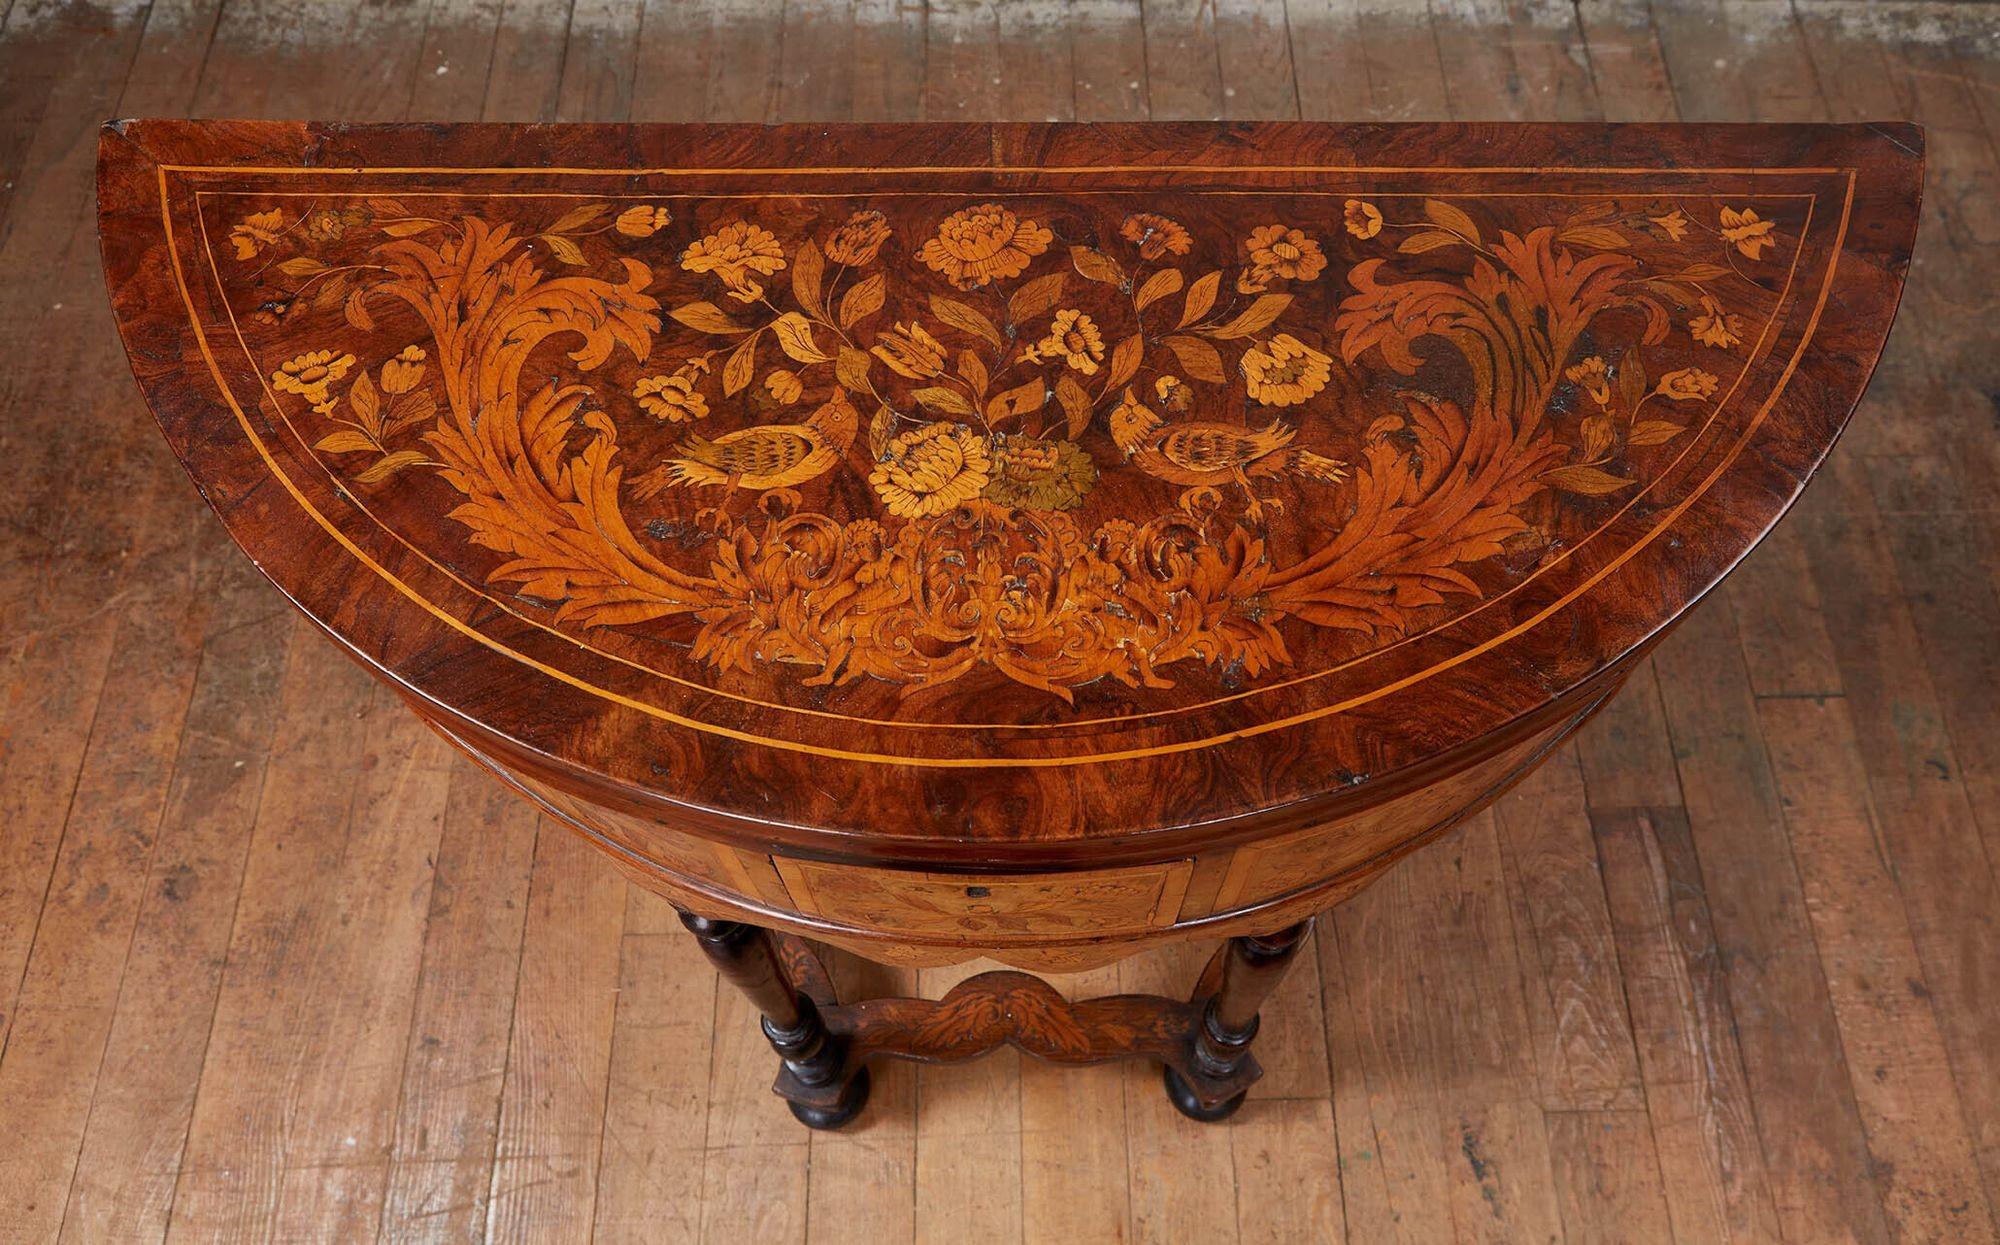 Rare William and Mary marquetry inlaid round card table, the top profusely inlaid with floral deration flanked by two birds over a scrolled acanthus leaf festoon, opening to reveal baize lined playing surface with the aces of clubs and spades, the